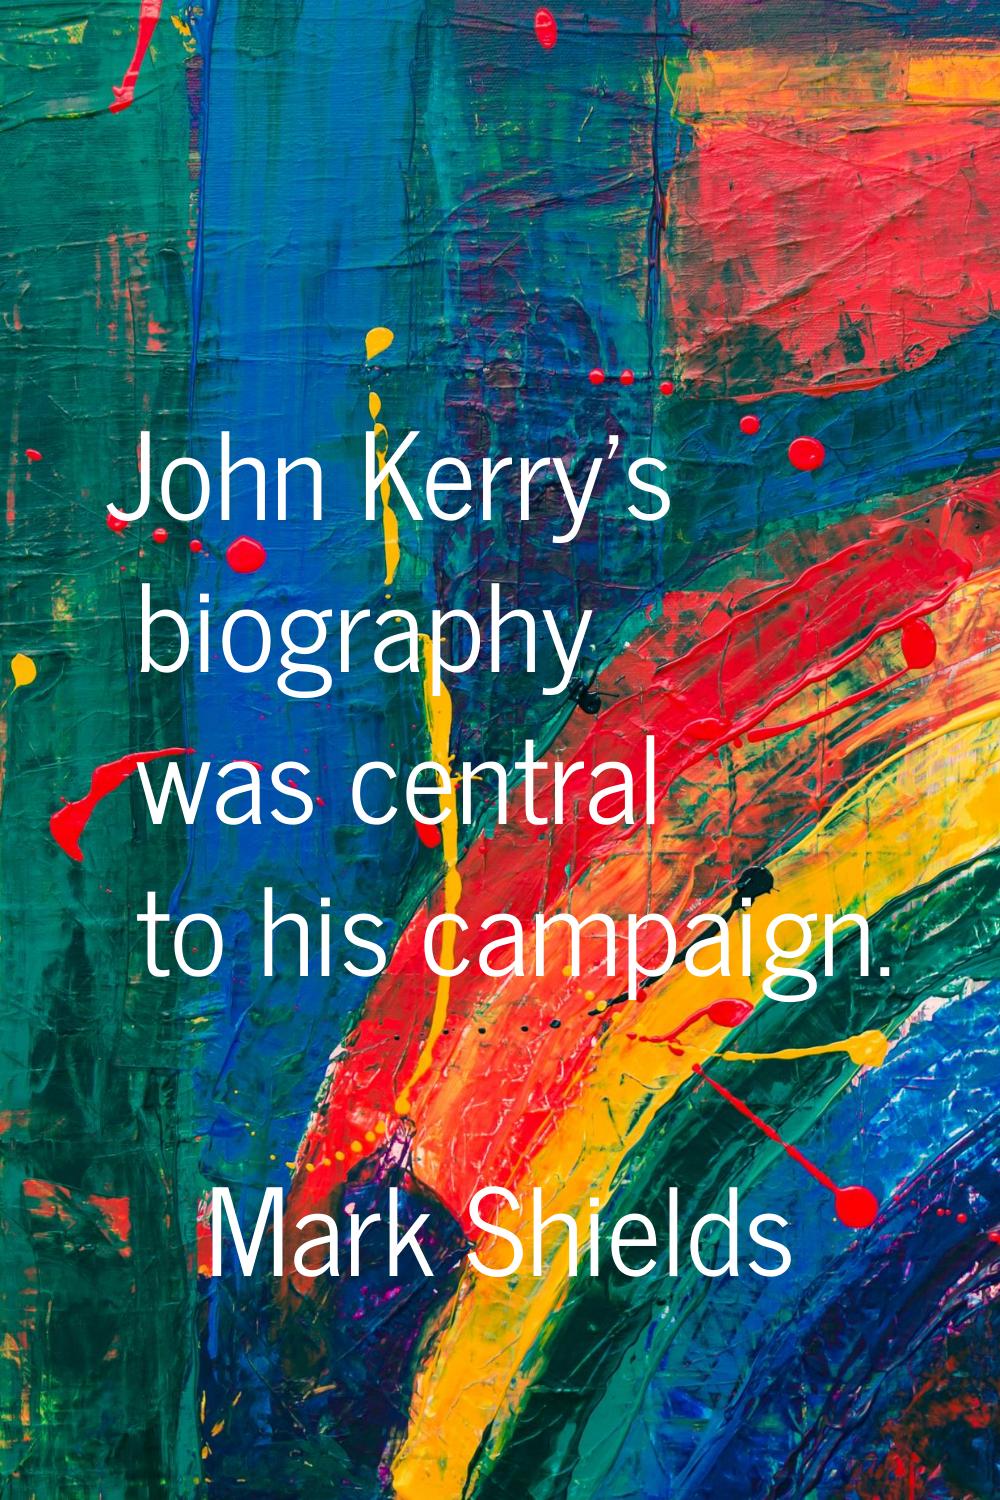 John Kerry's biography was central to his campaign.